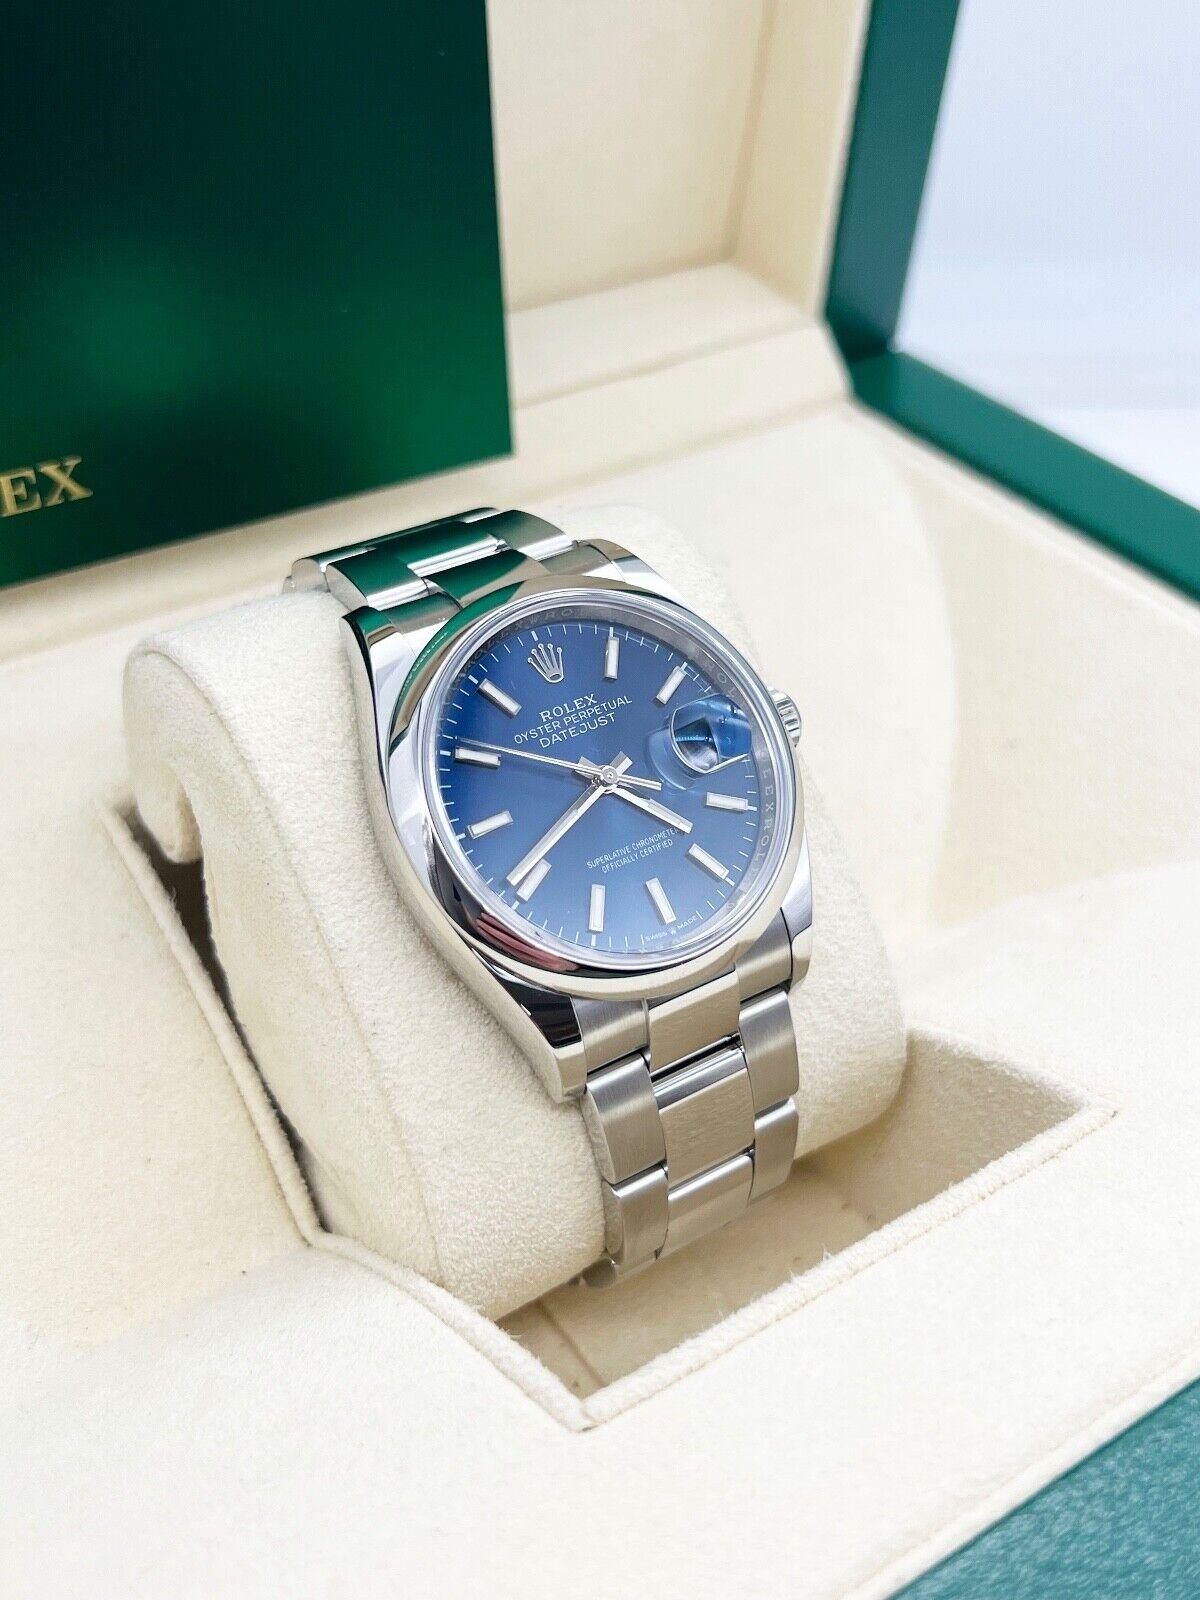 2021 Rolex 126200 36mm Datejust Blue Dial Stainless Steel Box Paper In Excellent Condition For Sale In San Diego, CA